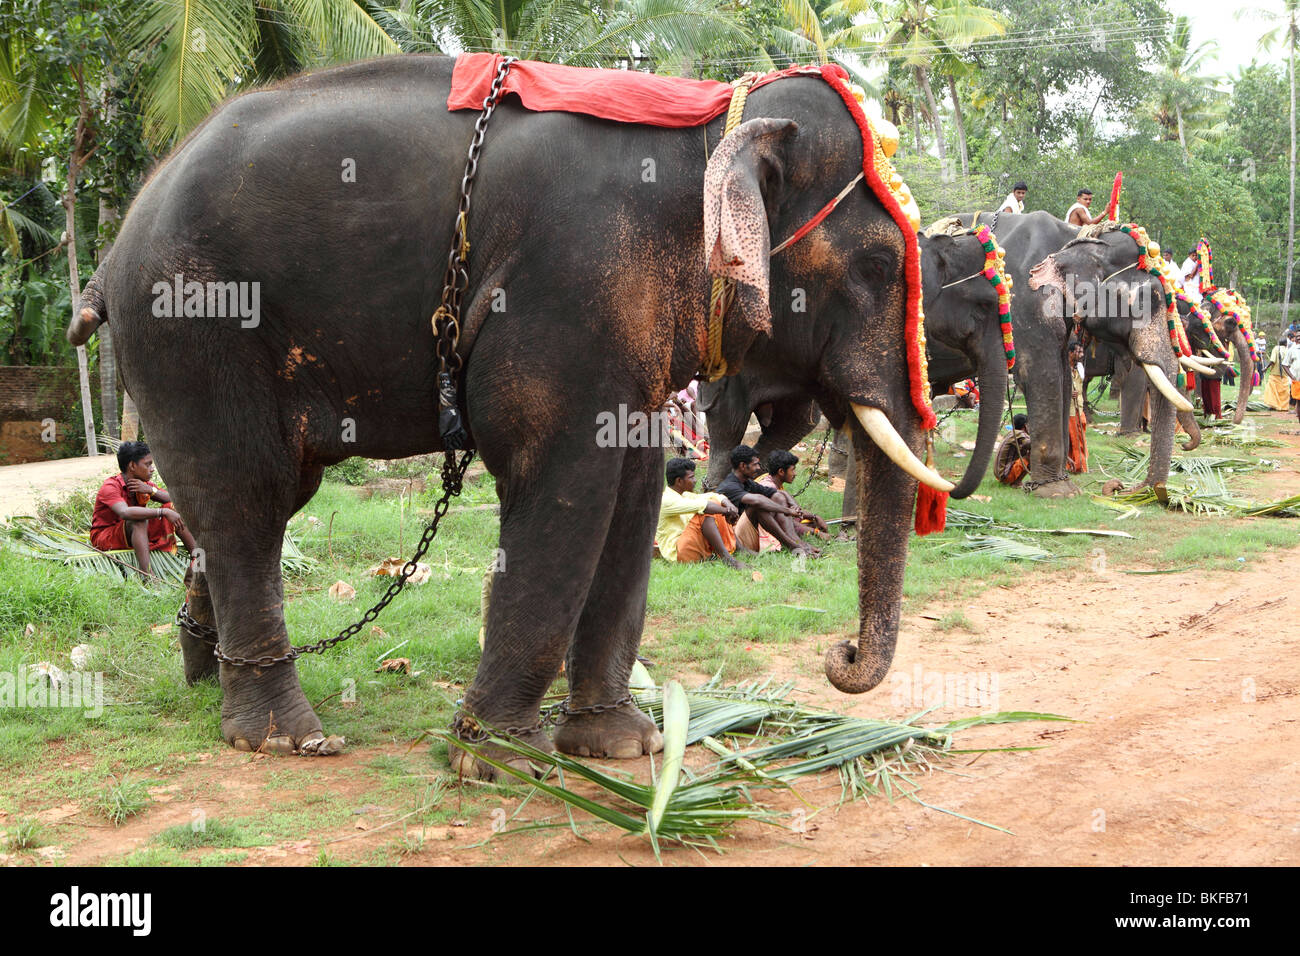 Mahouts sit between the elephants as the animals are lined up for a temple festival in Varkala, Kerala, India Stock Photo